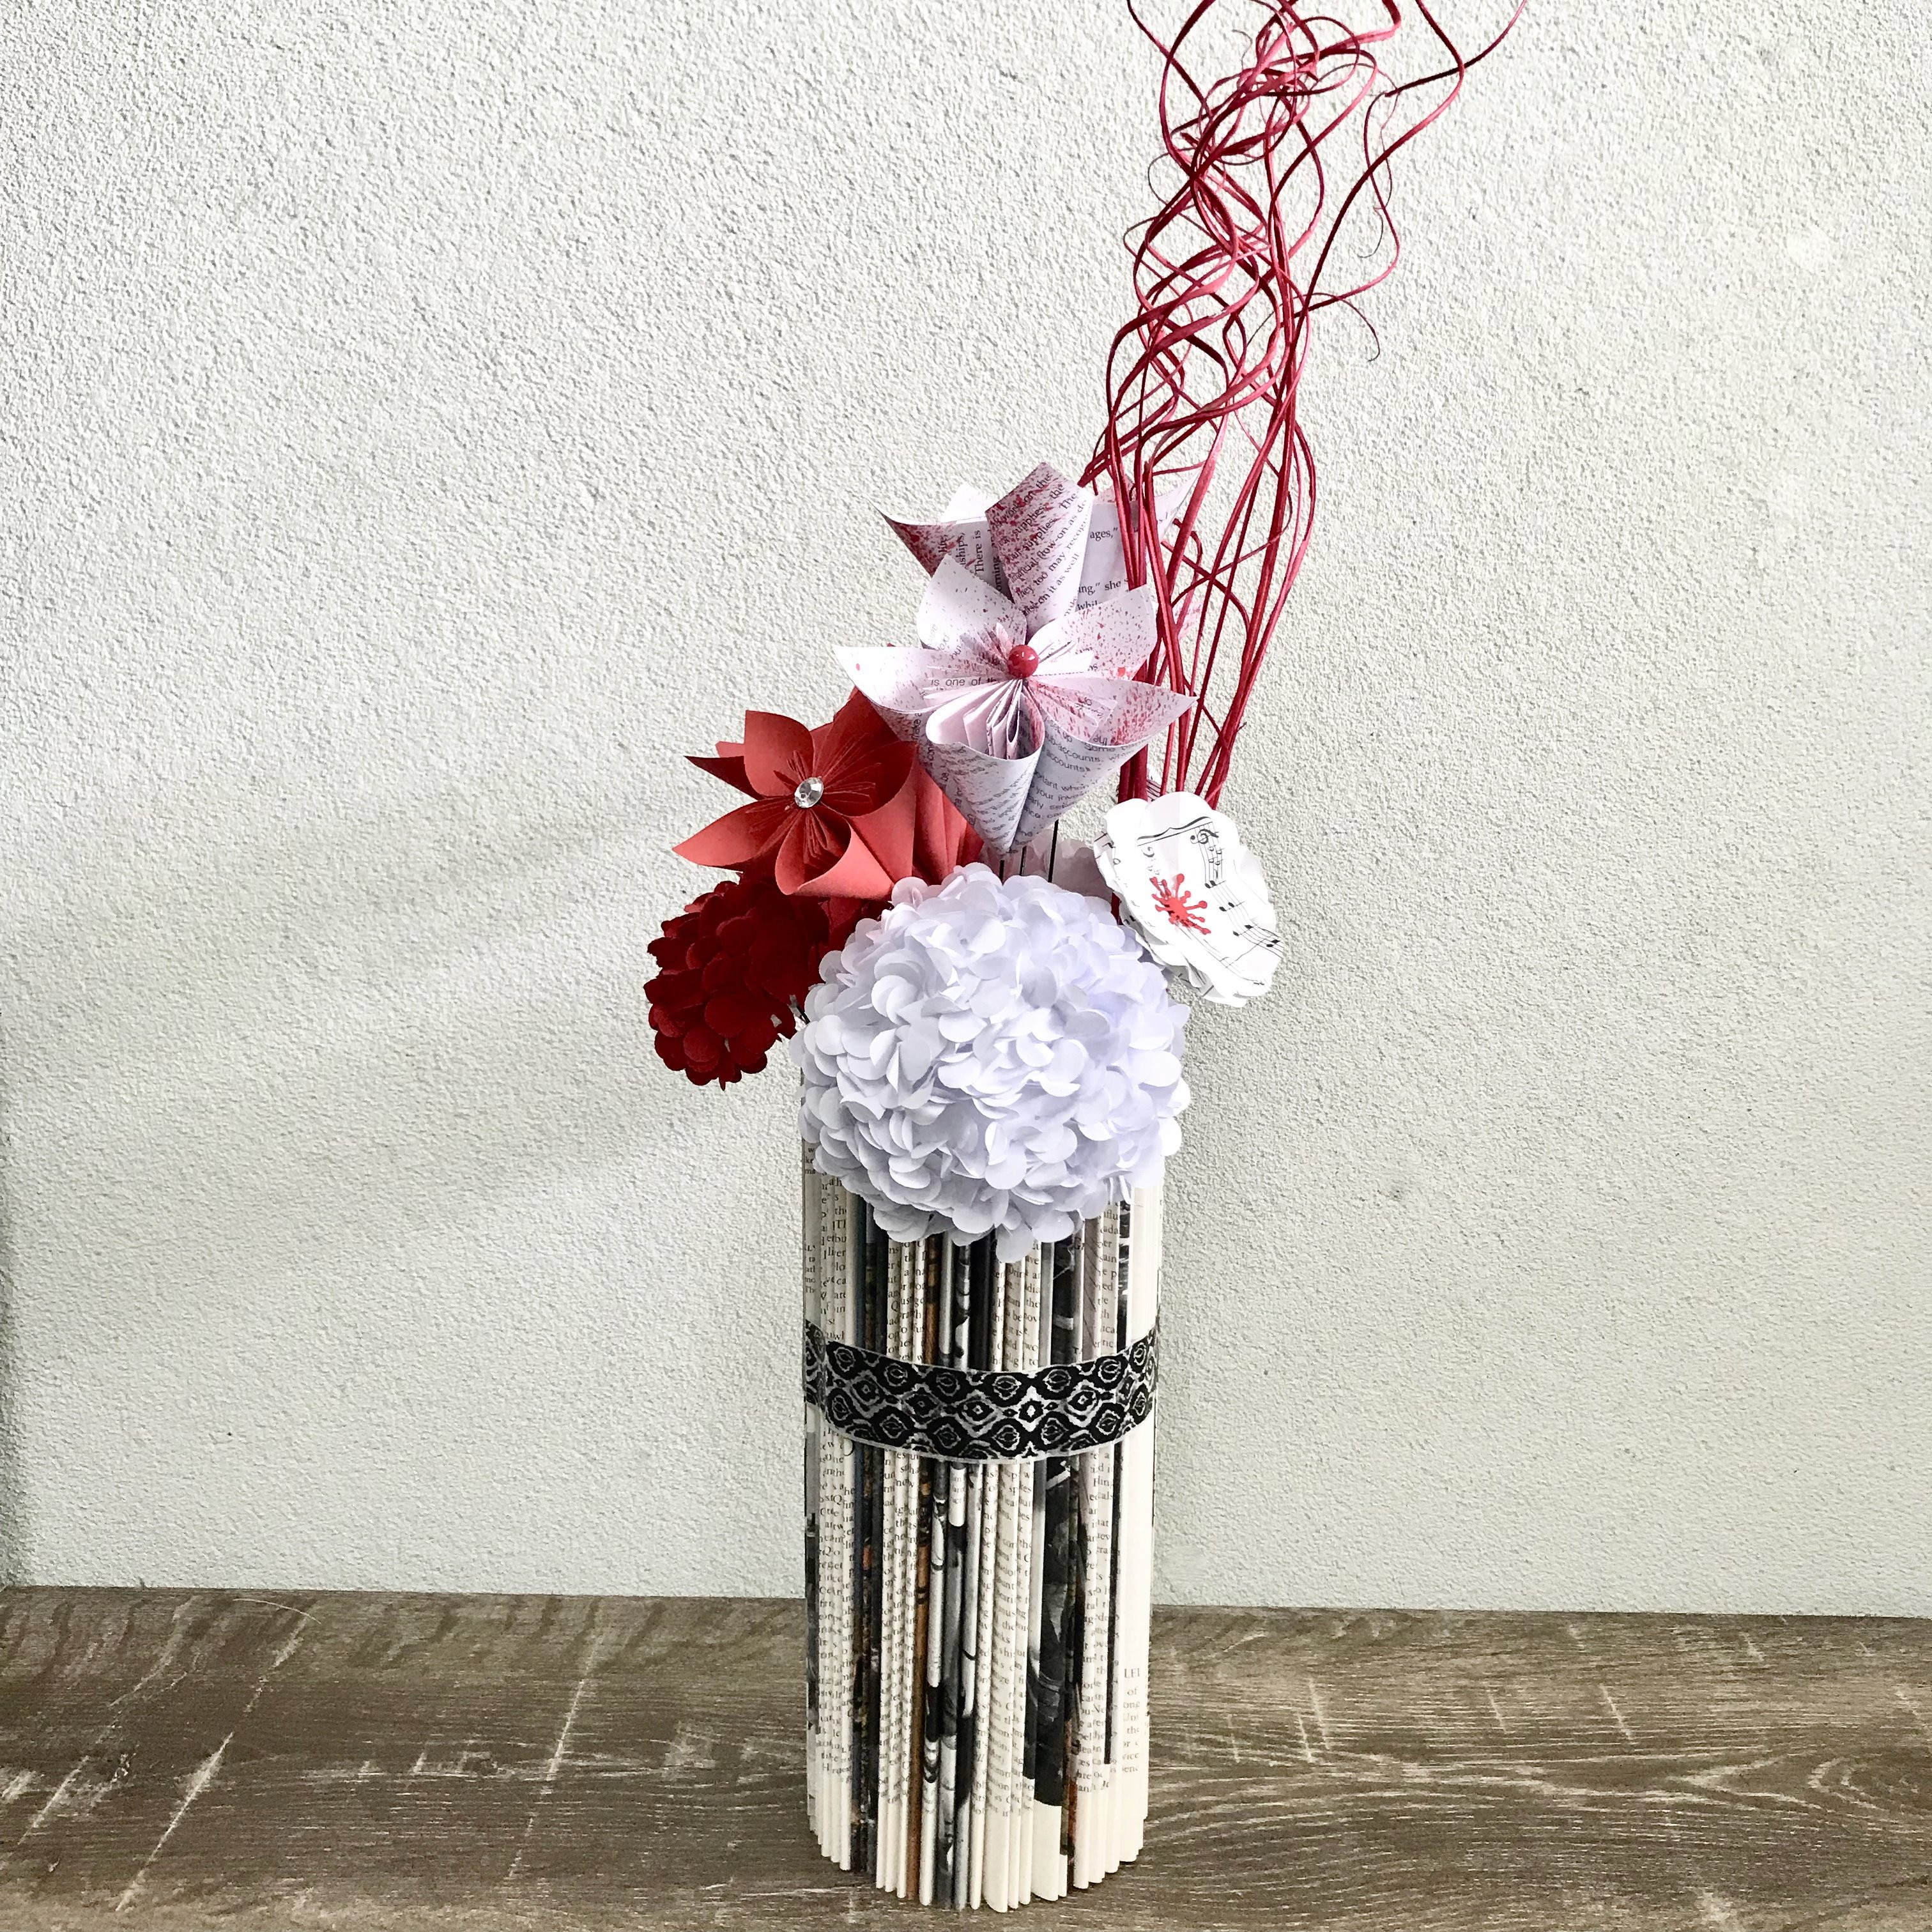 30 Wonderful Hydrangea and Rose Arrangement In Glass Vase 2022 free download hydrangea and rose arrangement in glass vase of red and white hydrangea flowers gift shack inside left side view of red and white paper flower arrangement with 1 hydrangea 3 kusudama